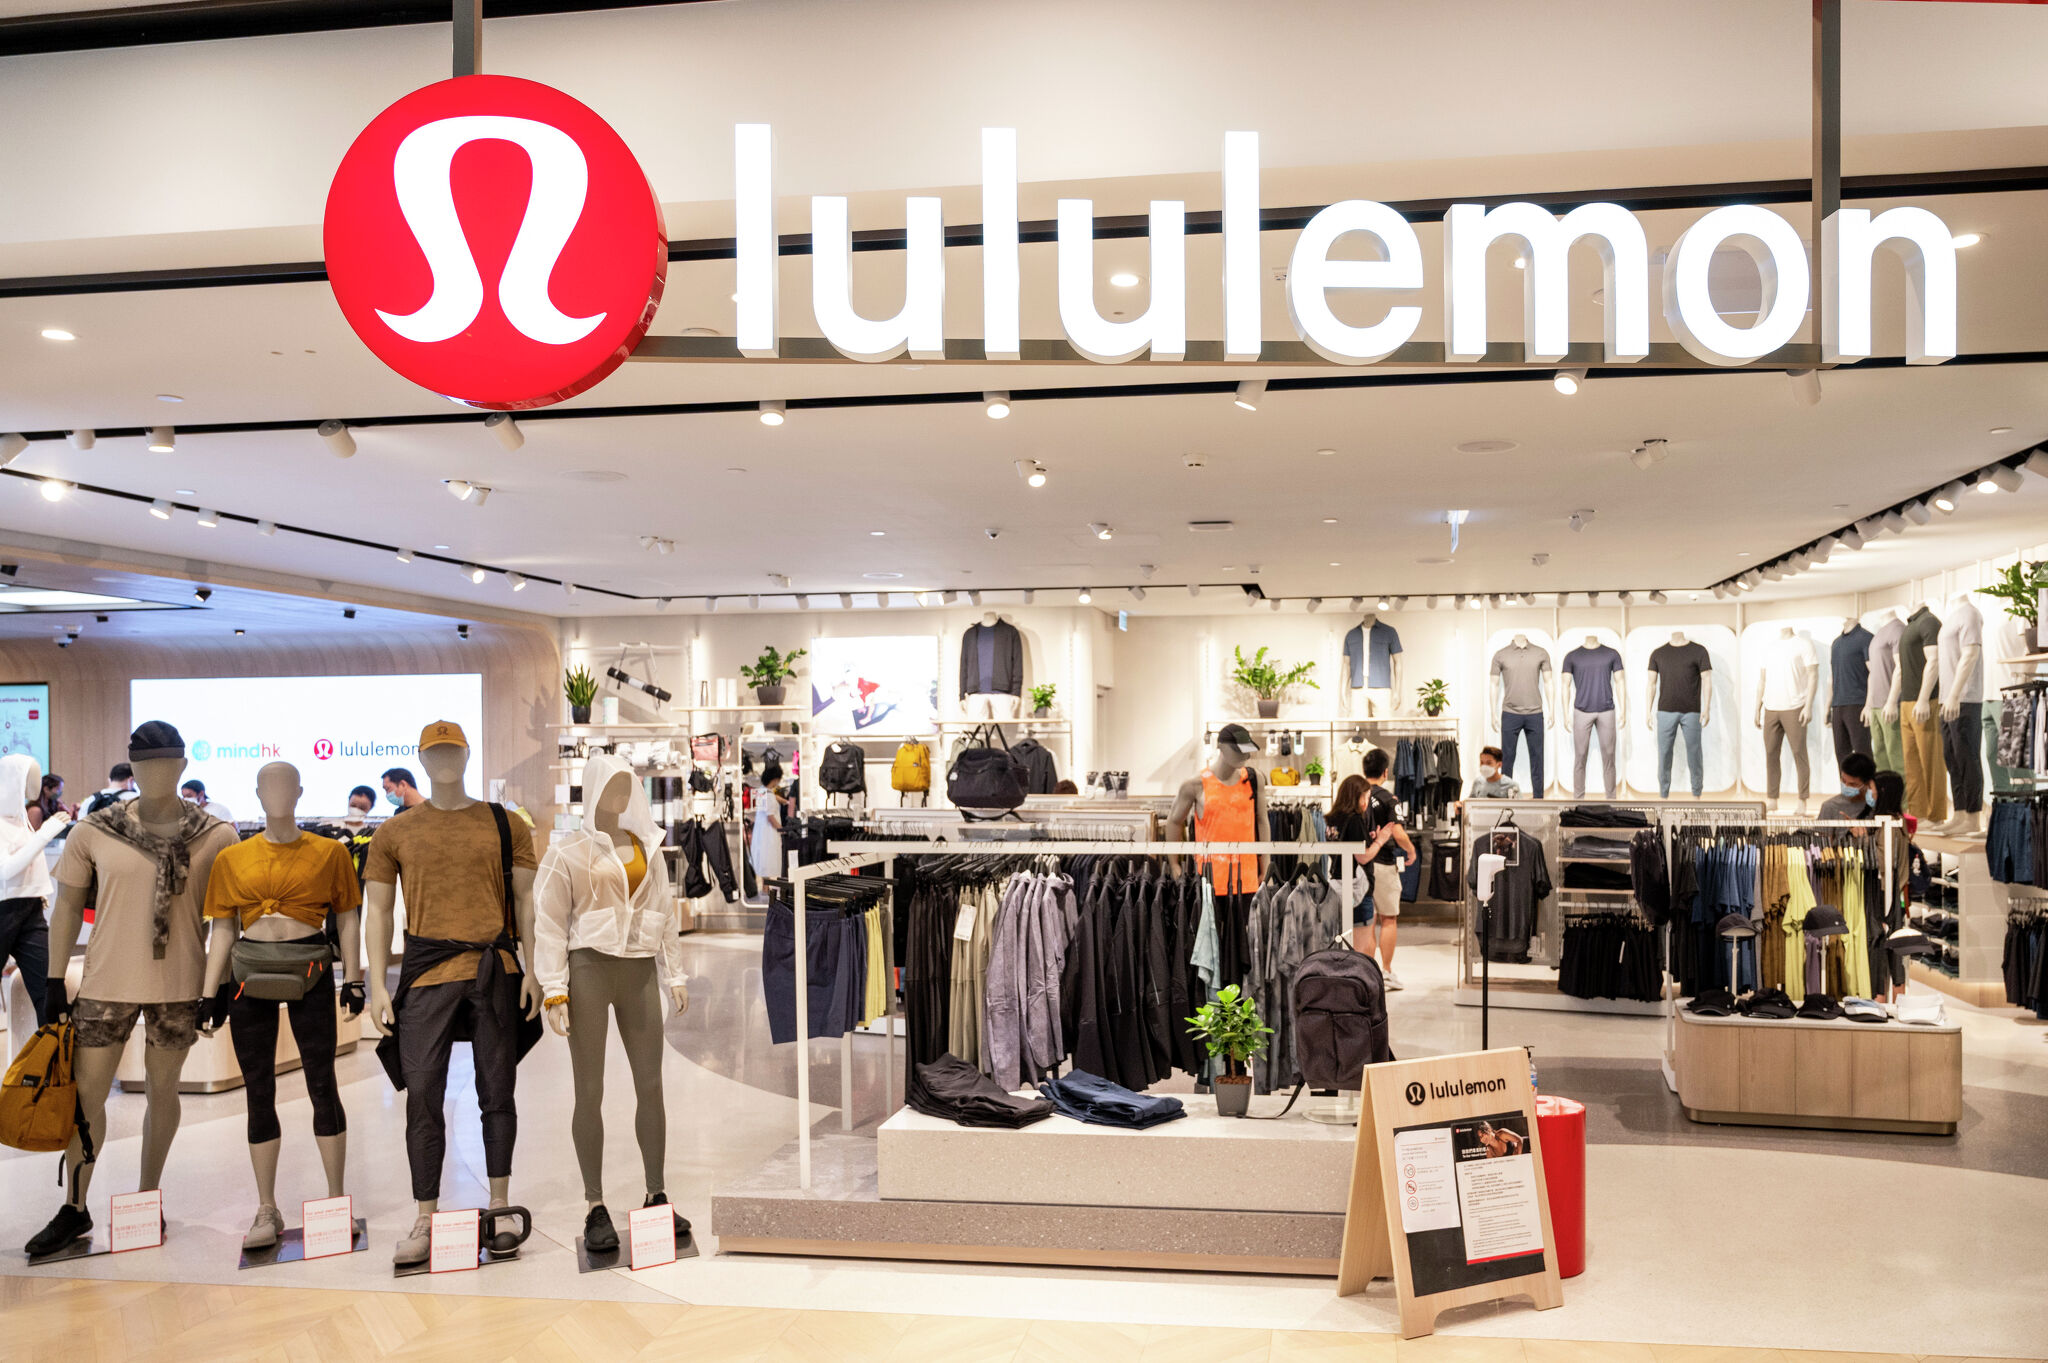 lululemon excess inventory sale: Find discounts on workout gear